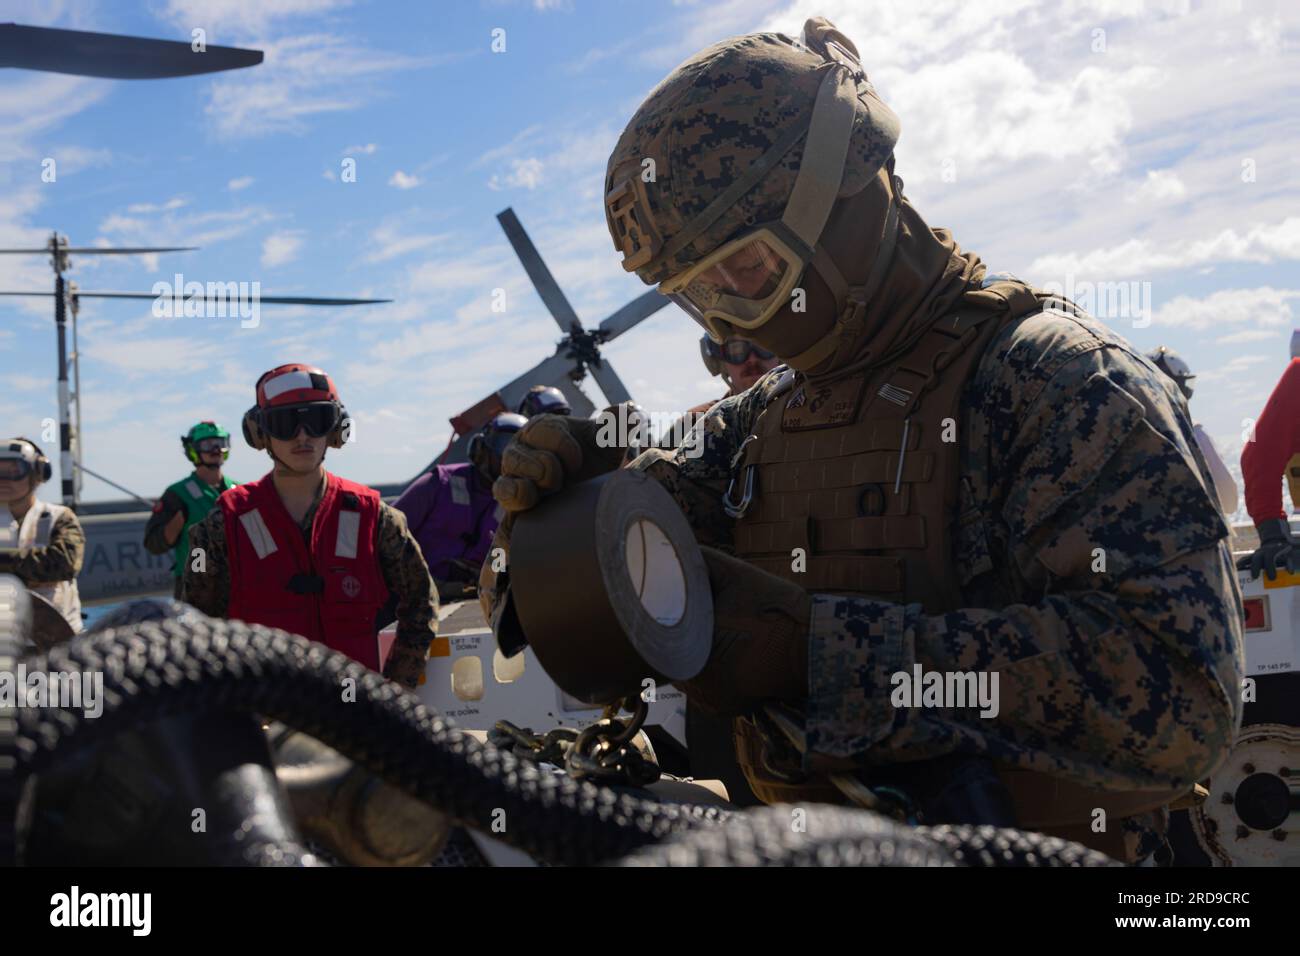 U.S. Marine Corps Cpl. Jacob Wyman, a landing support specialist with Combat Logistics Battalion 31, 31st Marine Expeditionary Unit, secures supplies in place during a real-life helicopter support team  aboard the amphibious transport dock ship USS Green Bay (LPD-20) in the Coral Sea, July 1, 2023. The HST was in support of establishing a forward arming and refueling point for real-life training and sustainment. Wyman is a native of Plaistow, New Hampshire. The 31st MEU is operating aboard ships of the America Amphibious Ready Group in the 7th Fleet area of operations to enhance interoperabili Stock Photo